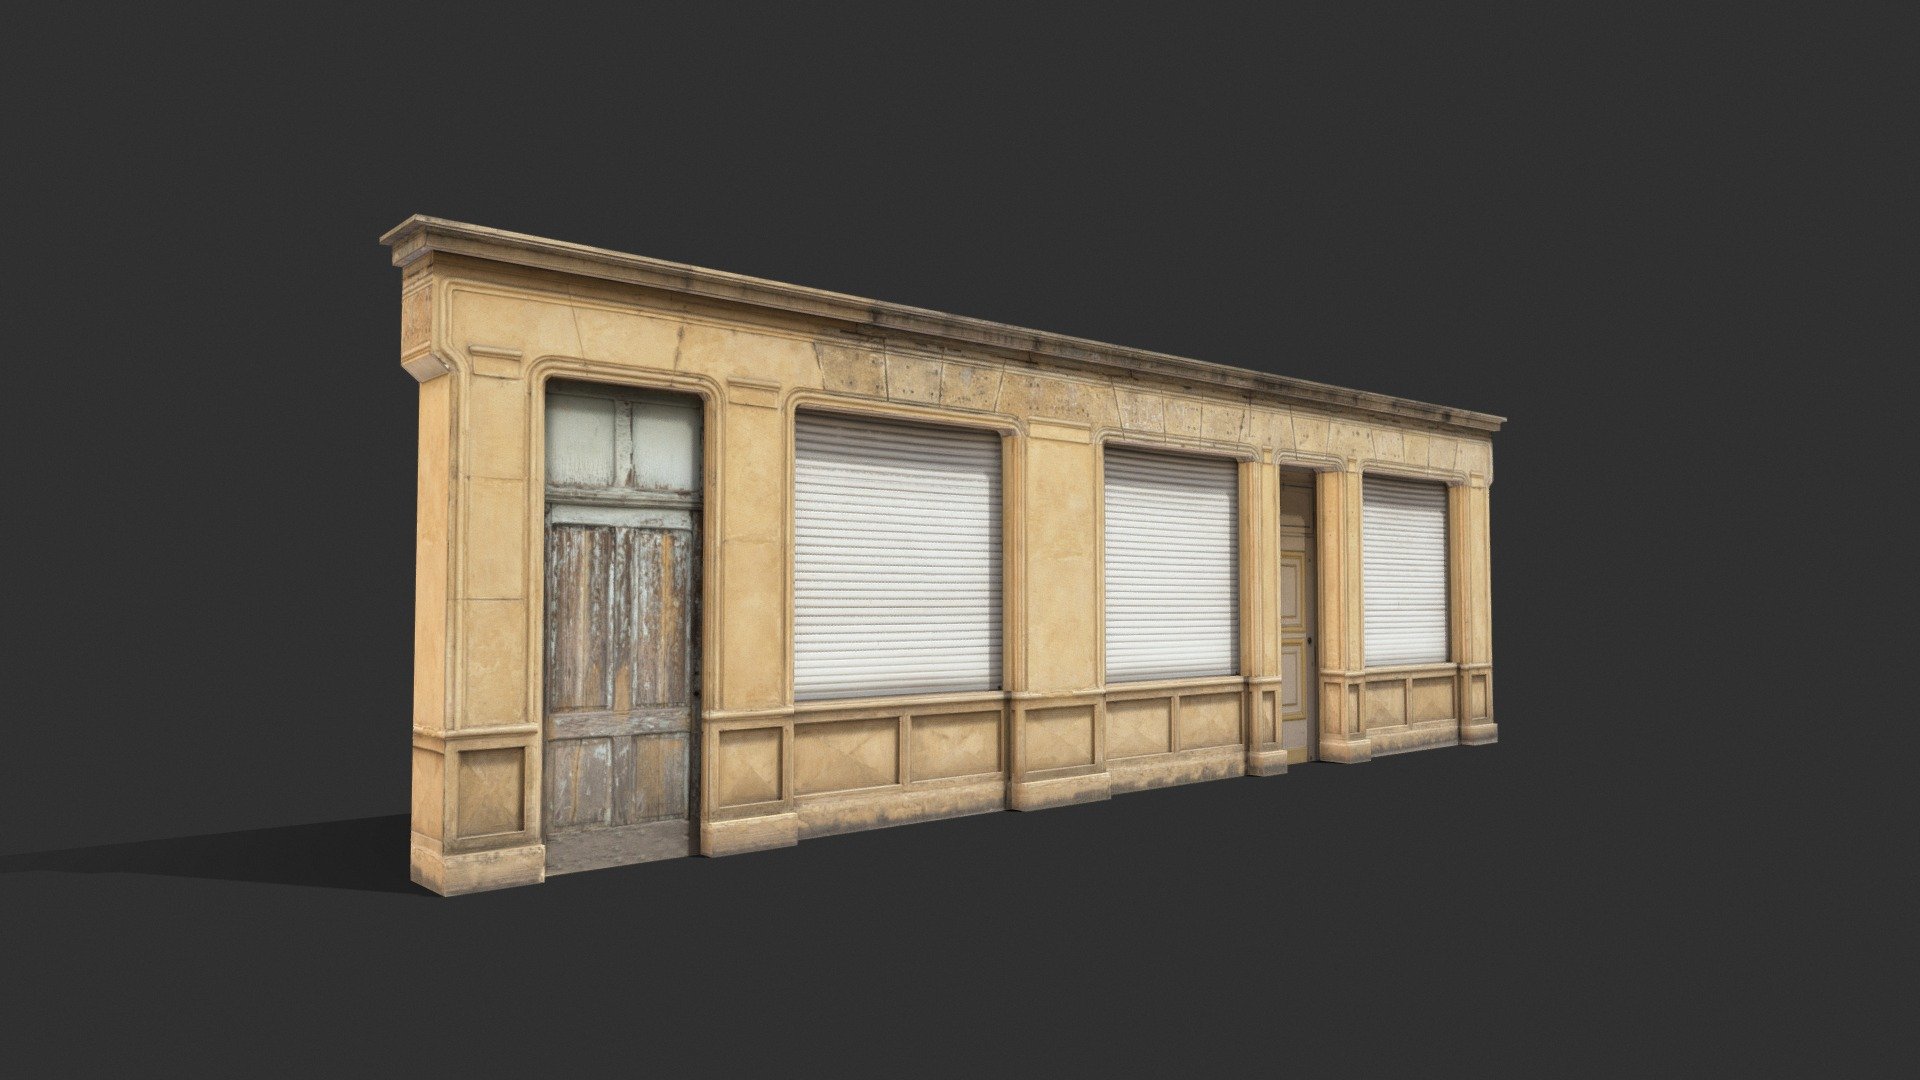 3D model of Old Store facade with closed shutter.

Resolution of textures: 4800x1442




Originally created with 3ds Max 2018

Unit system is set to centimeter

Model is built to real-world scale

Rendered in Marmoset Toolbag, 3ds Max Vray,

Texture Set: Diffuse, Normal, Bump


Special notes:

.fbx format is recommended for import in other 3d software. If your software doesn't support .fbx format, please use .3ds format; .obj, format was exported from 3ds Max 3d model